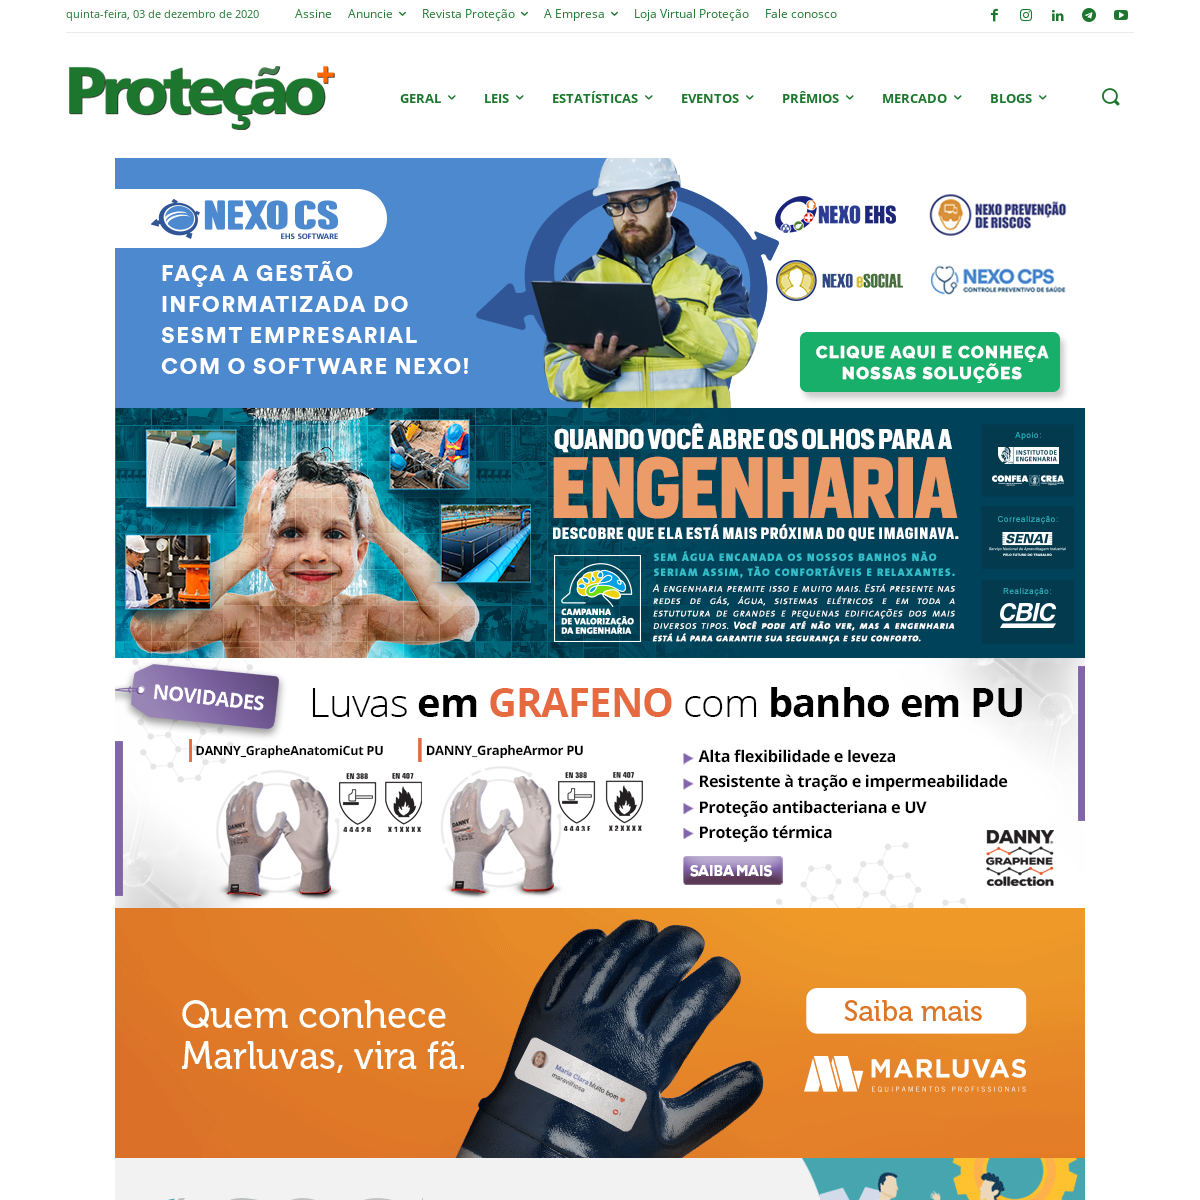 A complete backup of protecao.com.br